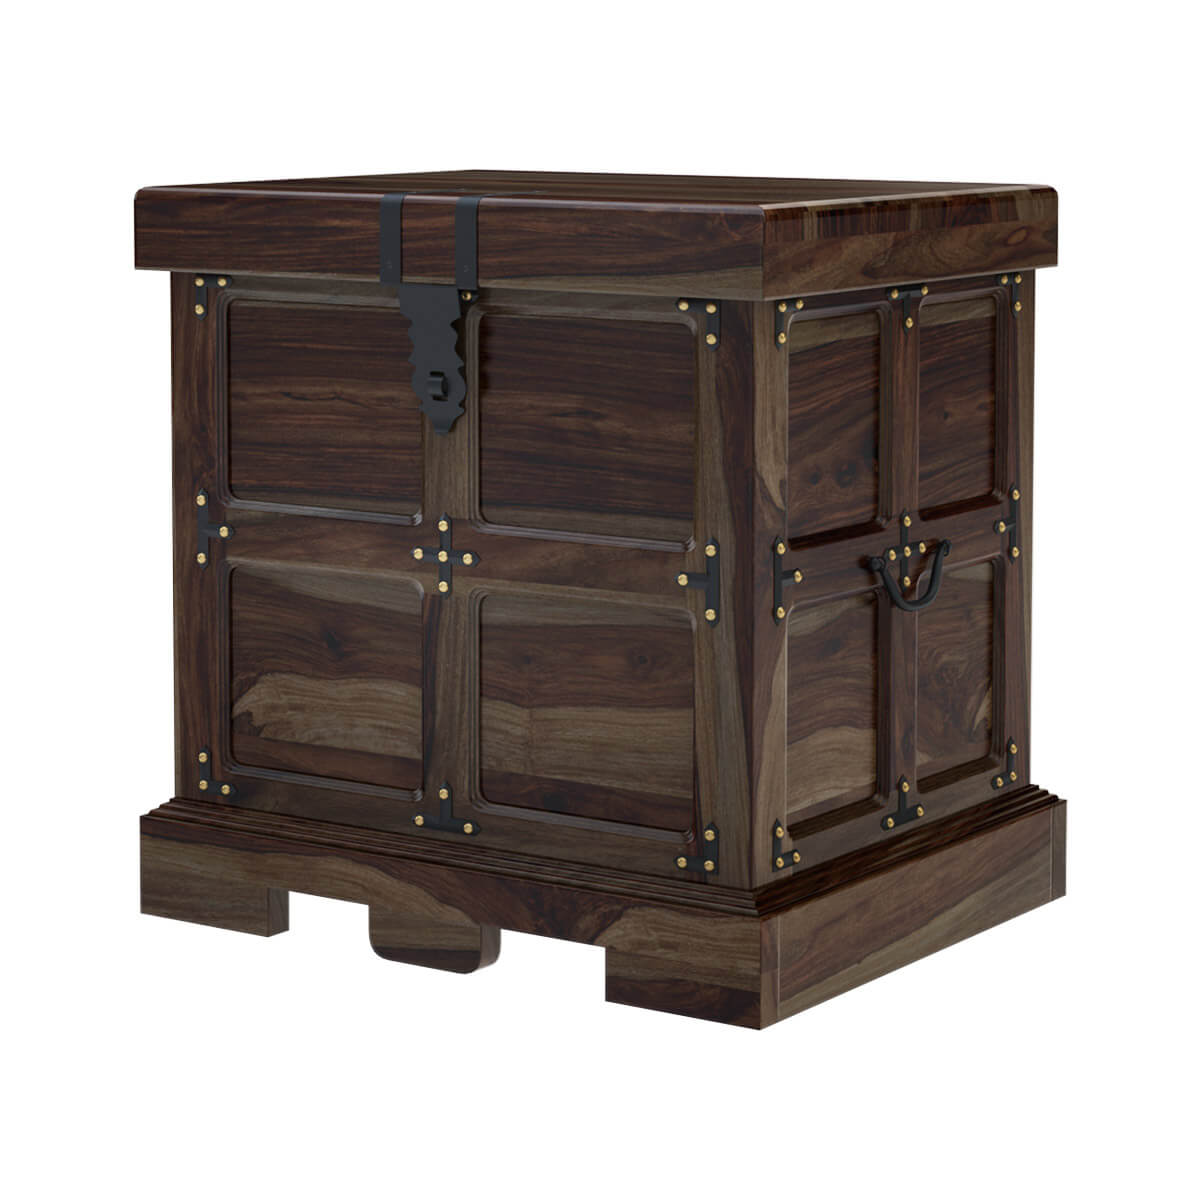 Beaufort Steamer Rustic Solid Wood Storage Trunk Style End Table.